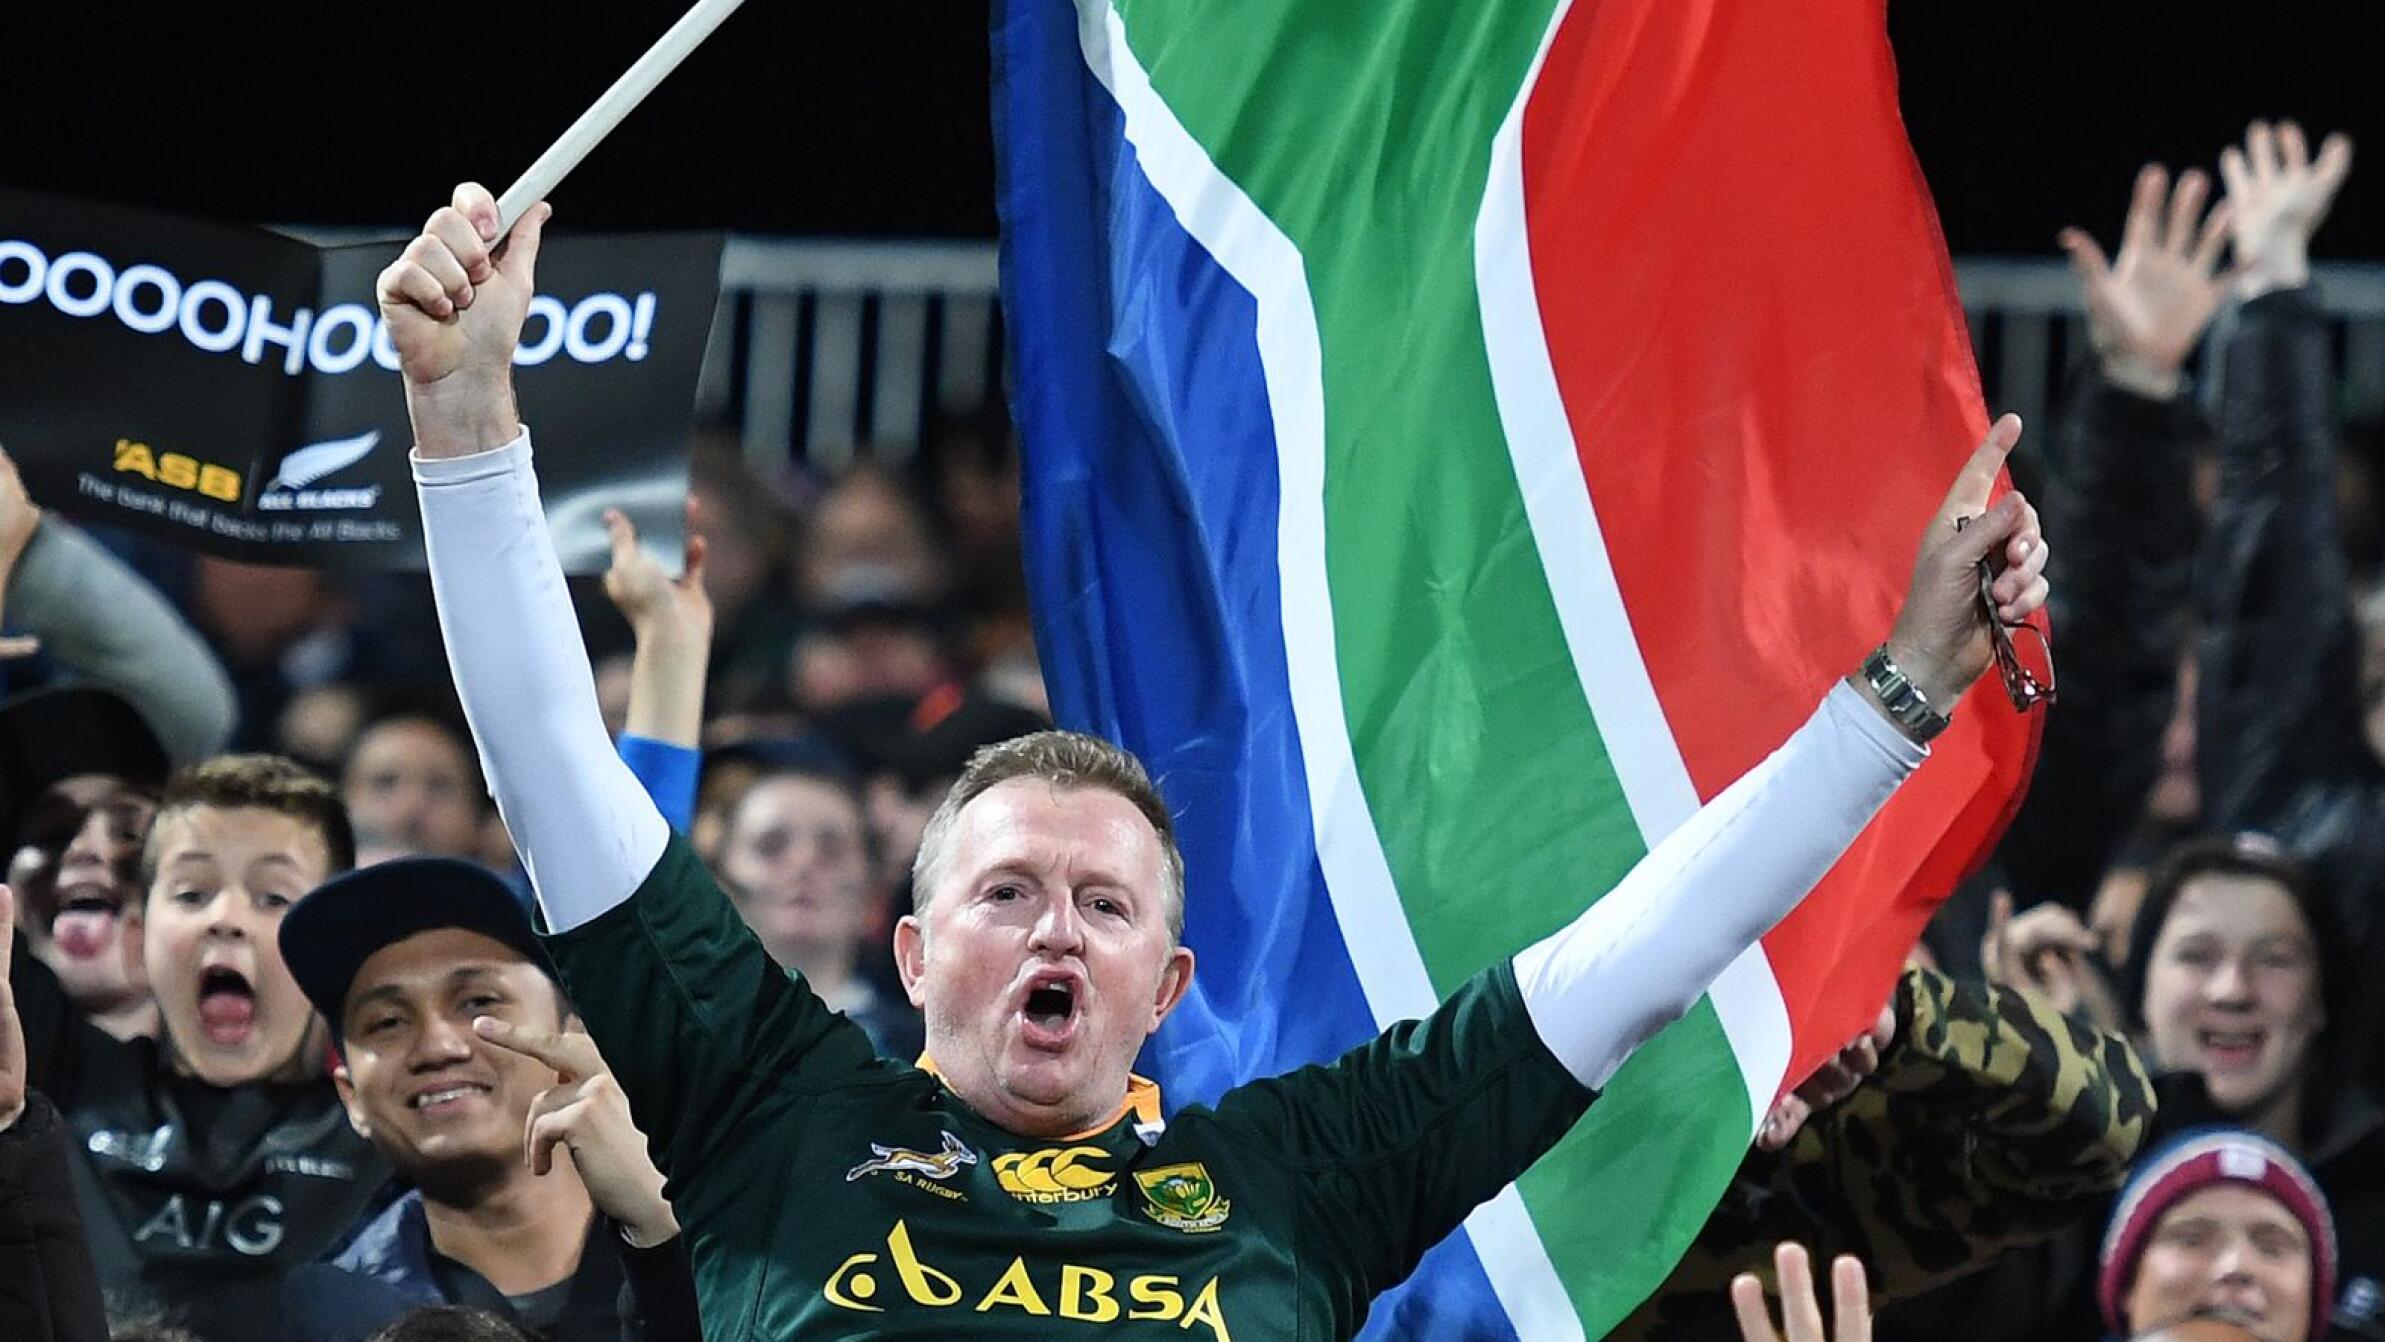 Finally … full capacity crowds allowed at SA stadiums once more